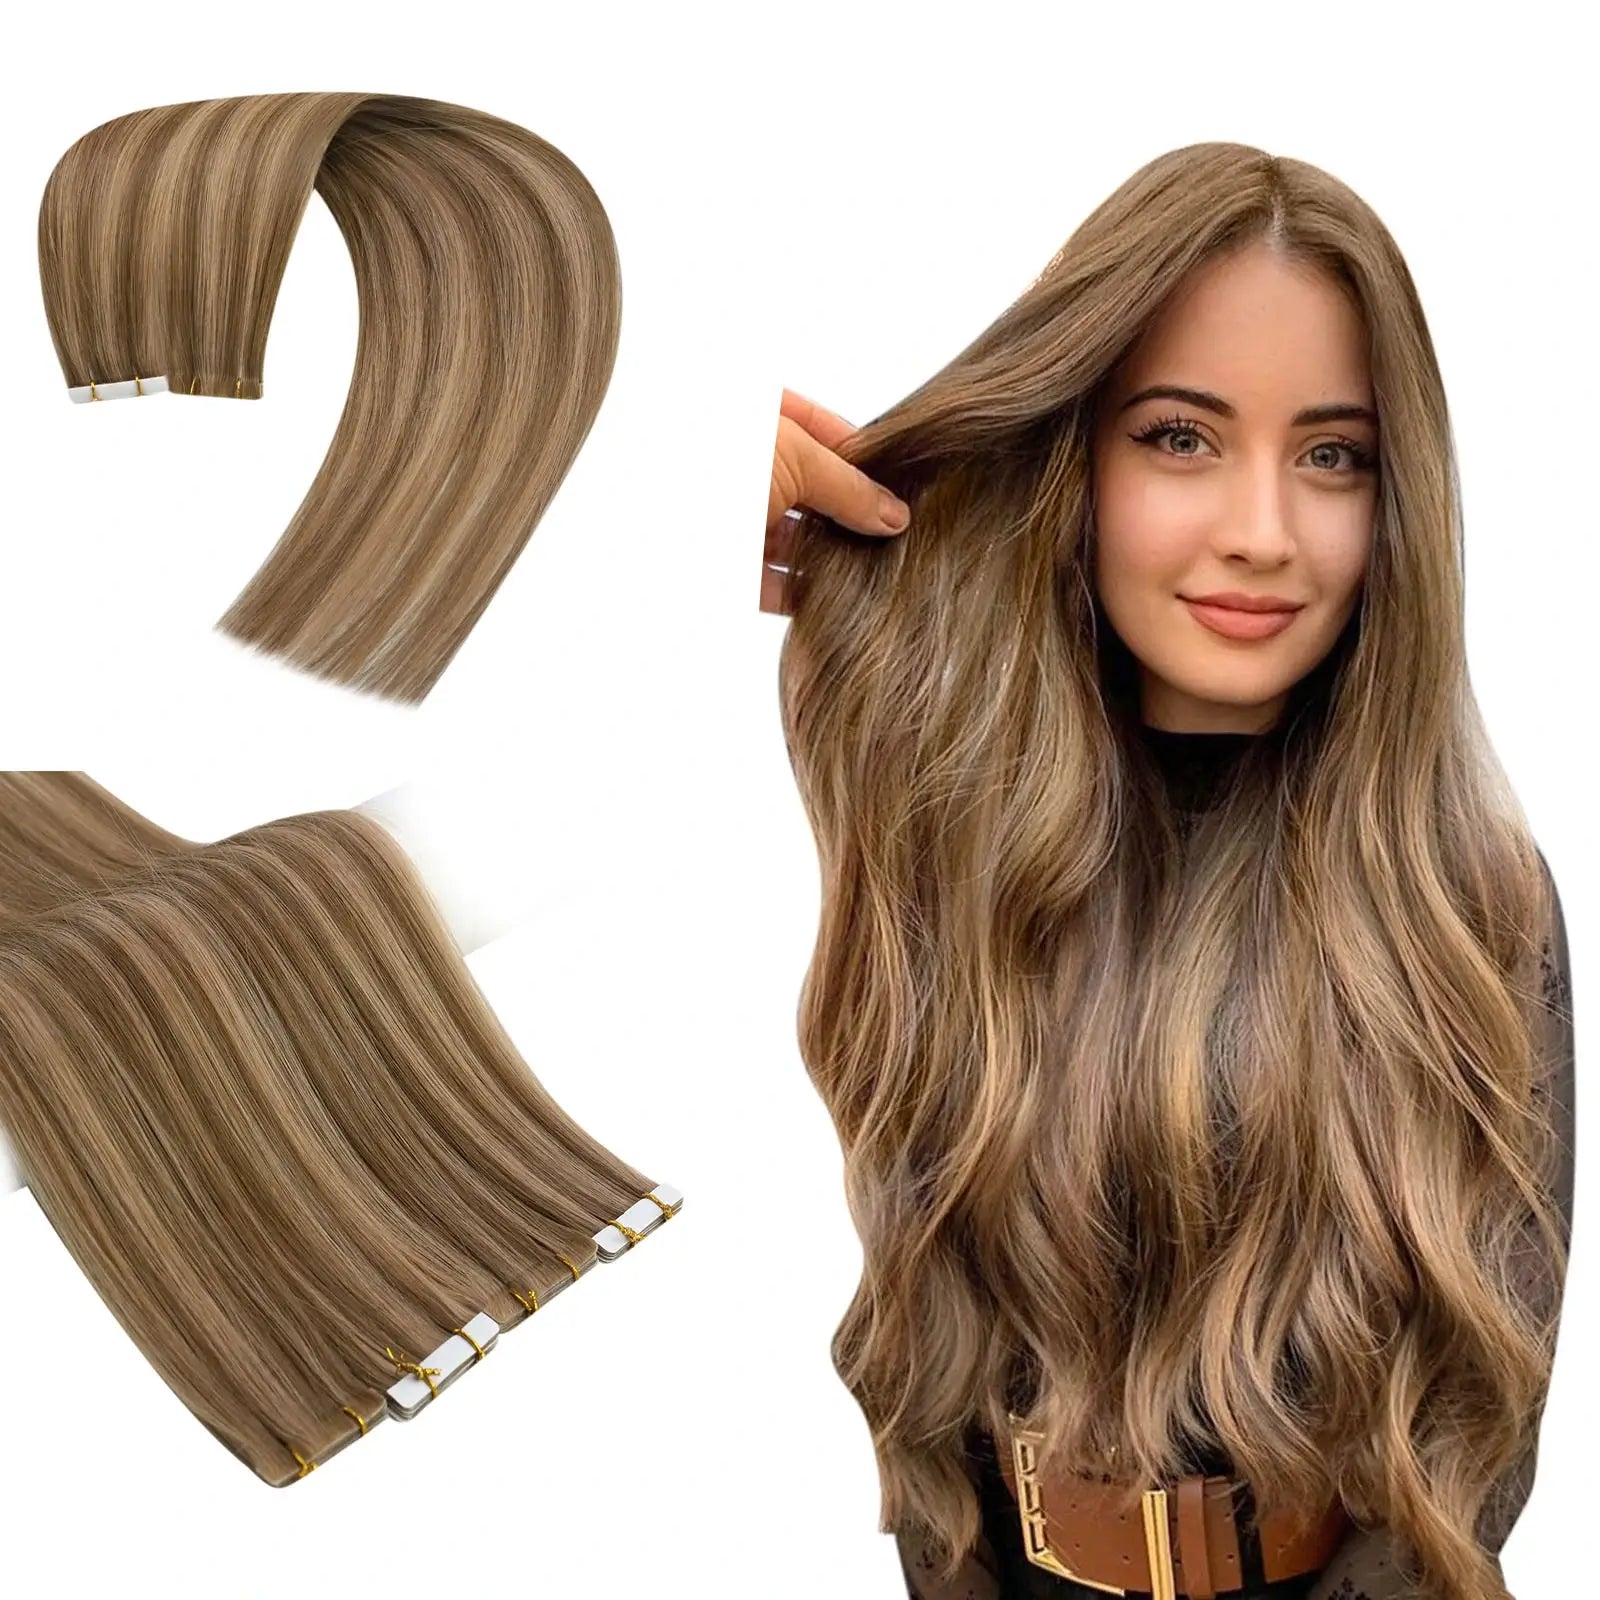 SeamlessInjectionTapeinHairExtensionsBrownBlondeHighlight